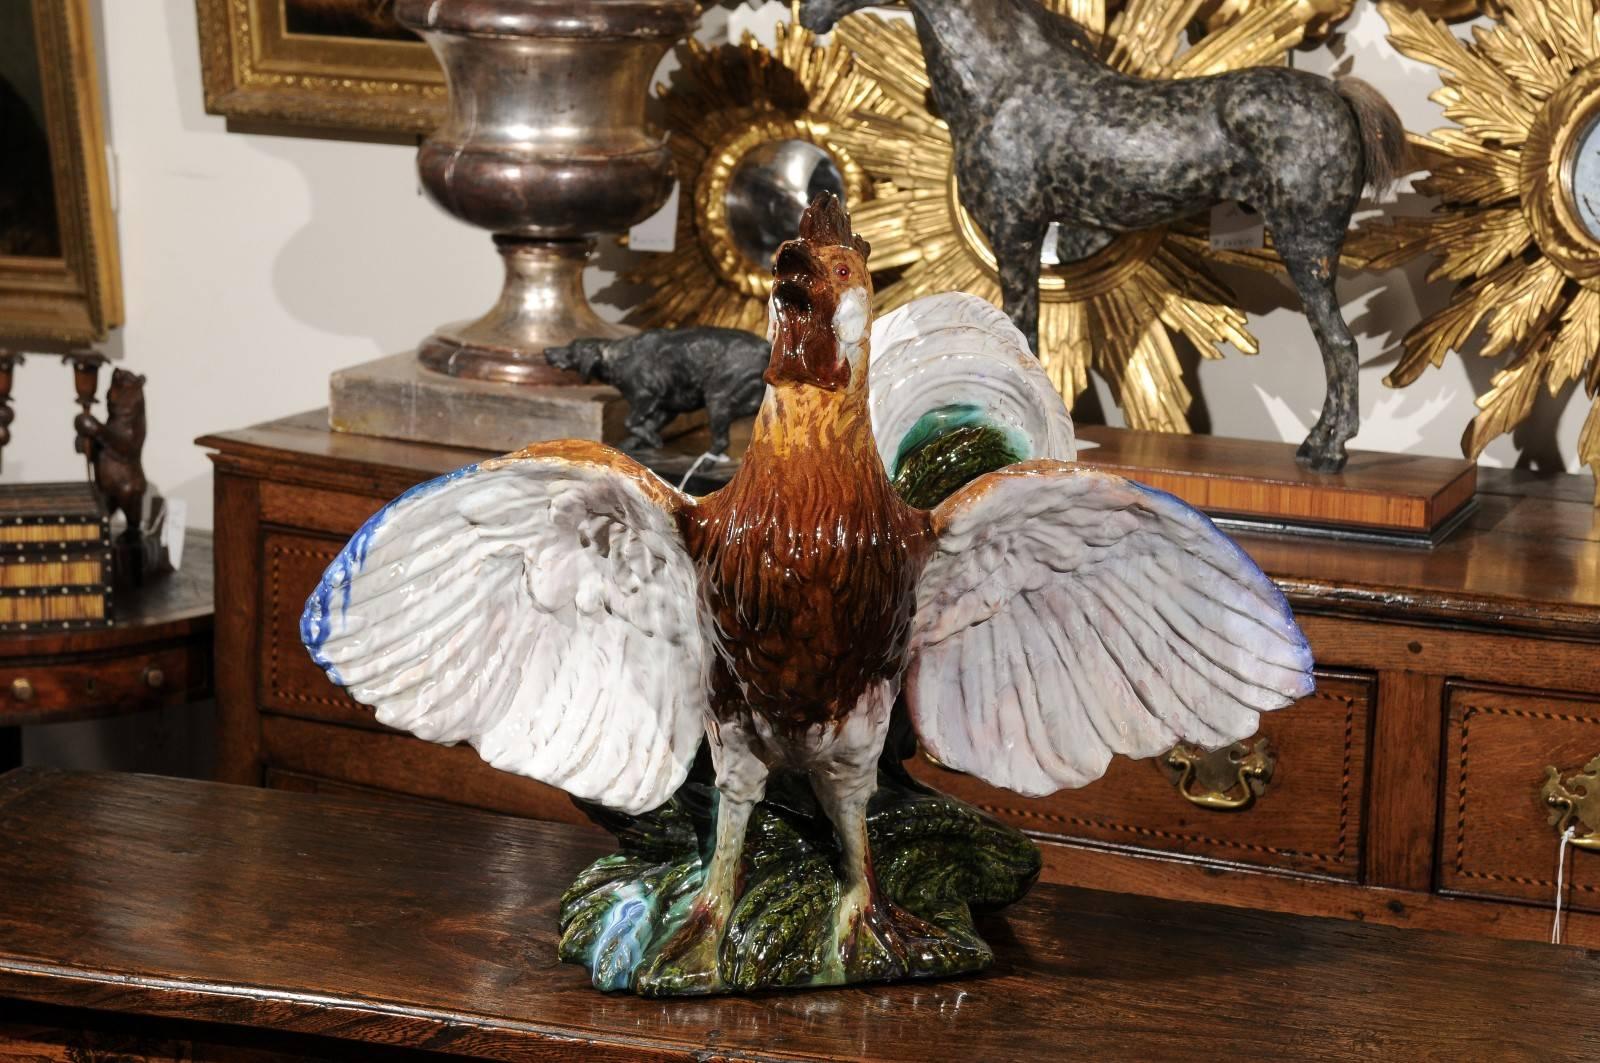 This early 20th century French Majolica features a rooster (the French national emblem) standing up, spreading its wings. This exquisite Majolica (tin-glazed earthenware) sculpture shows great craftsmanship in the treatment of the details. The